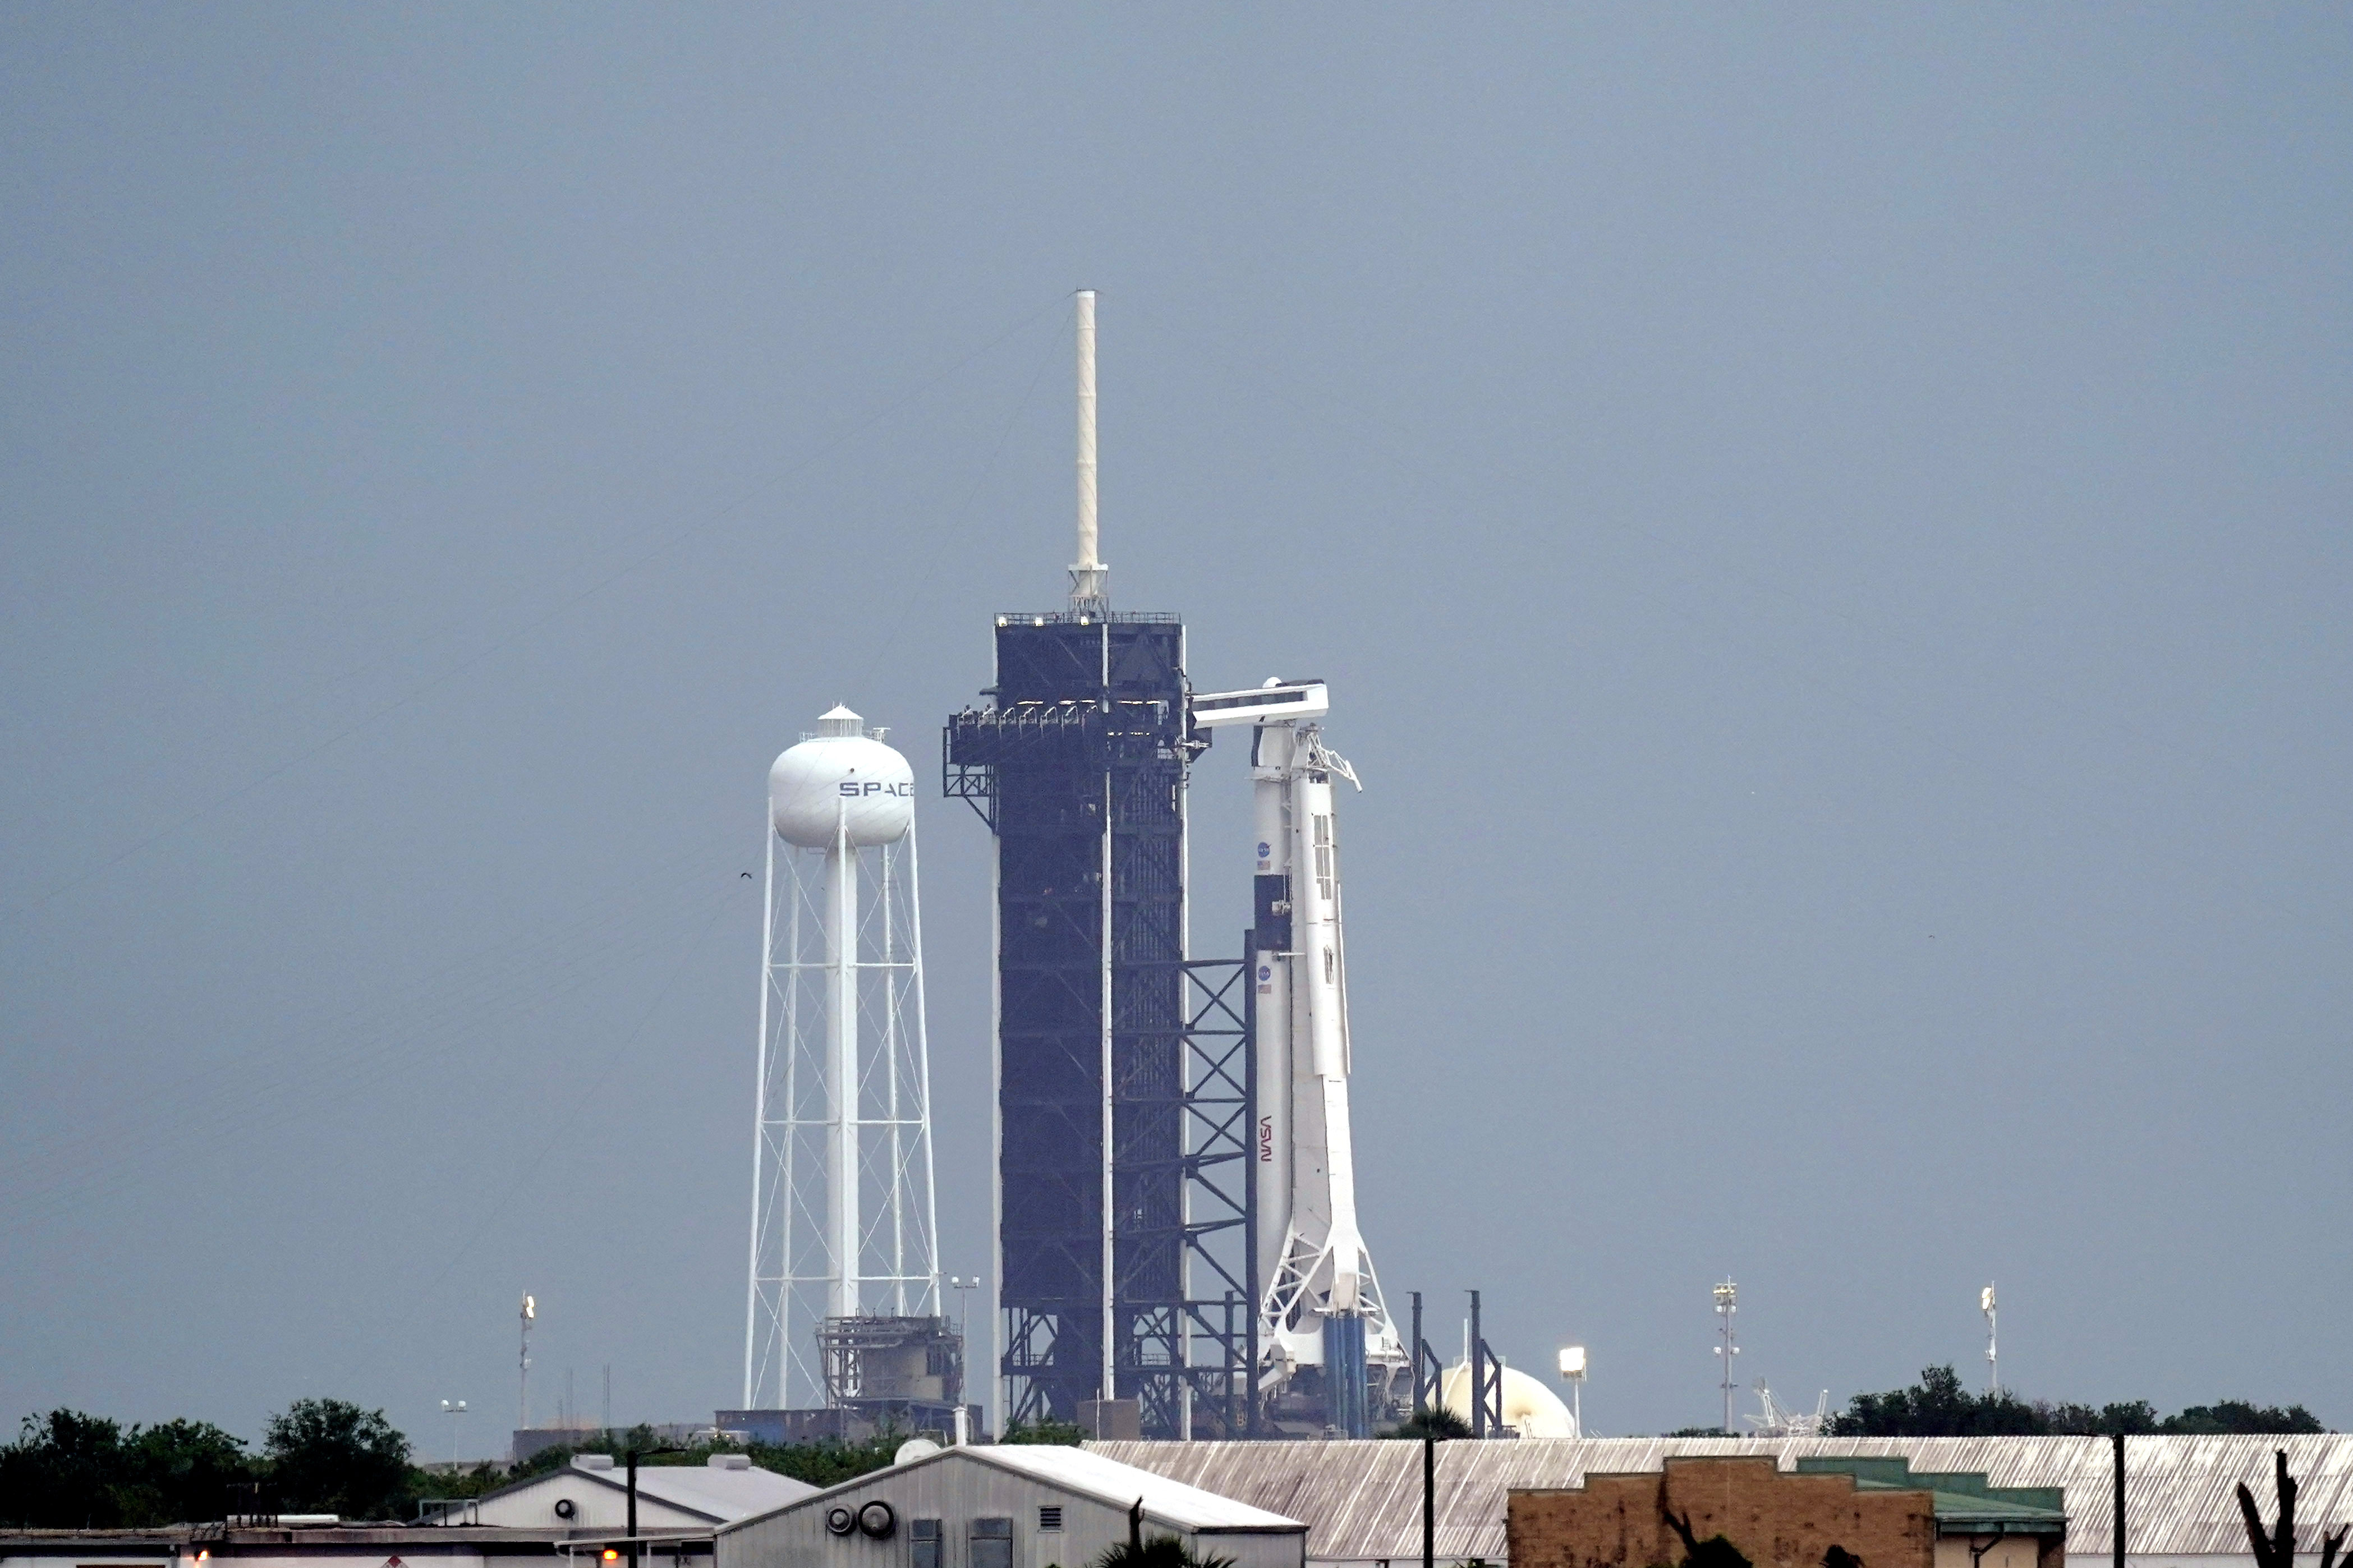 falcon 9 launch tower